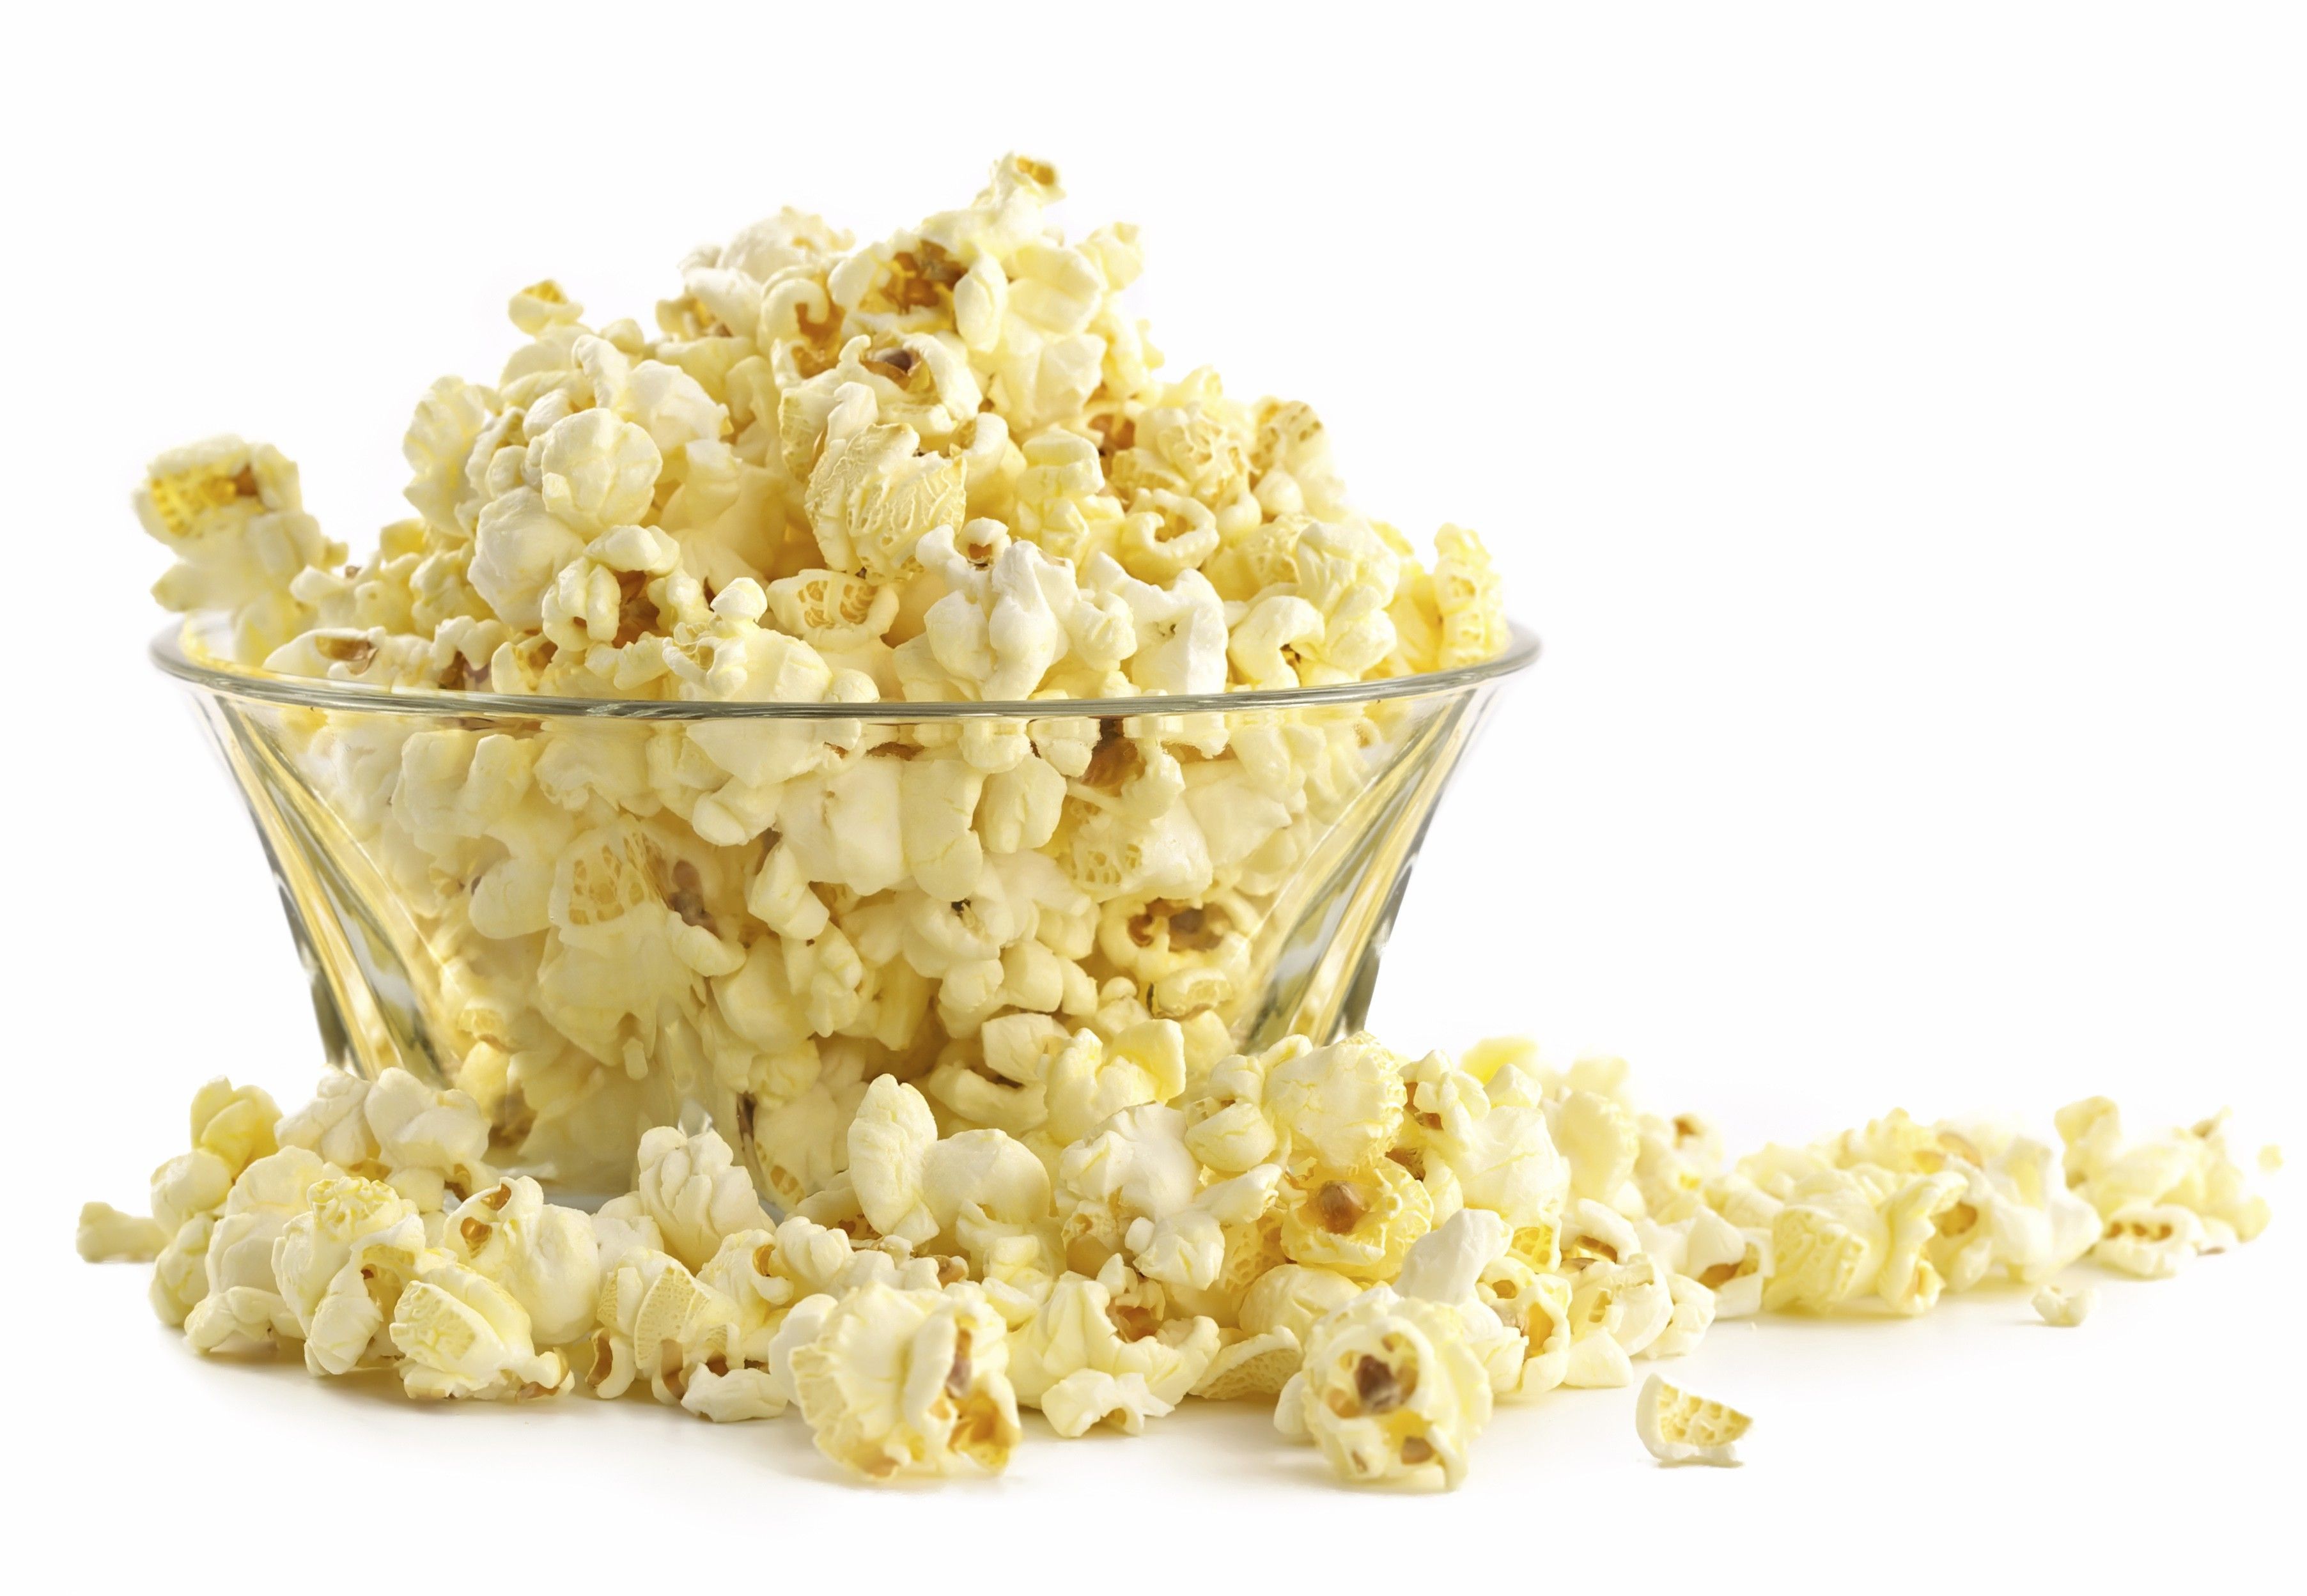 Mobile wallpaper: Food, Popcorn, 725654 download the picture for free